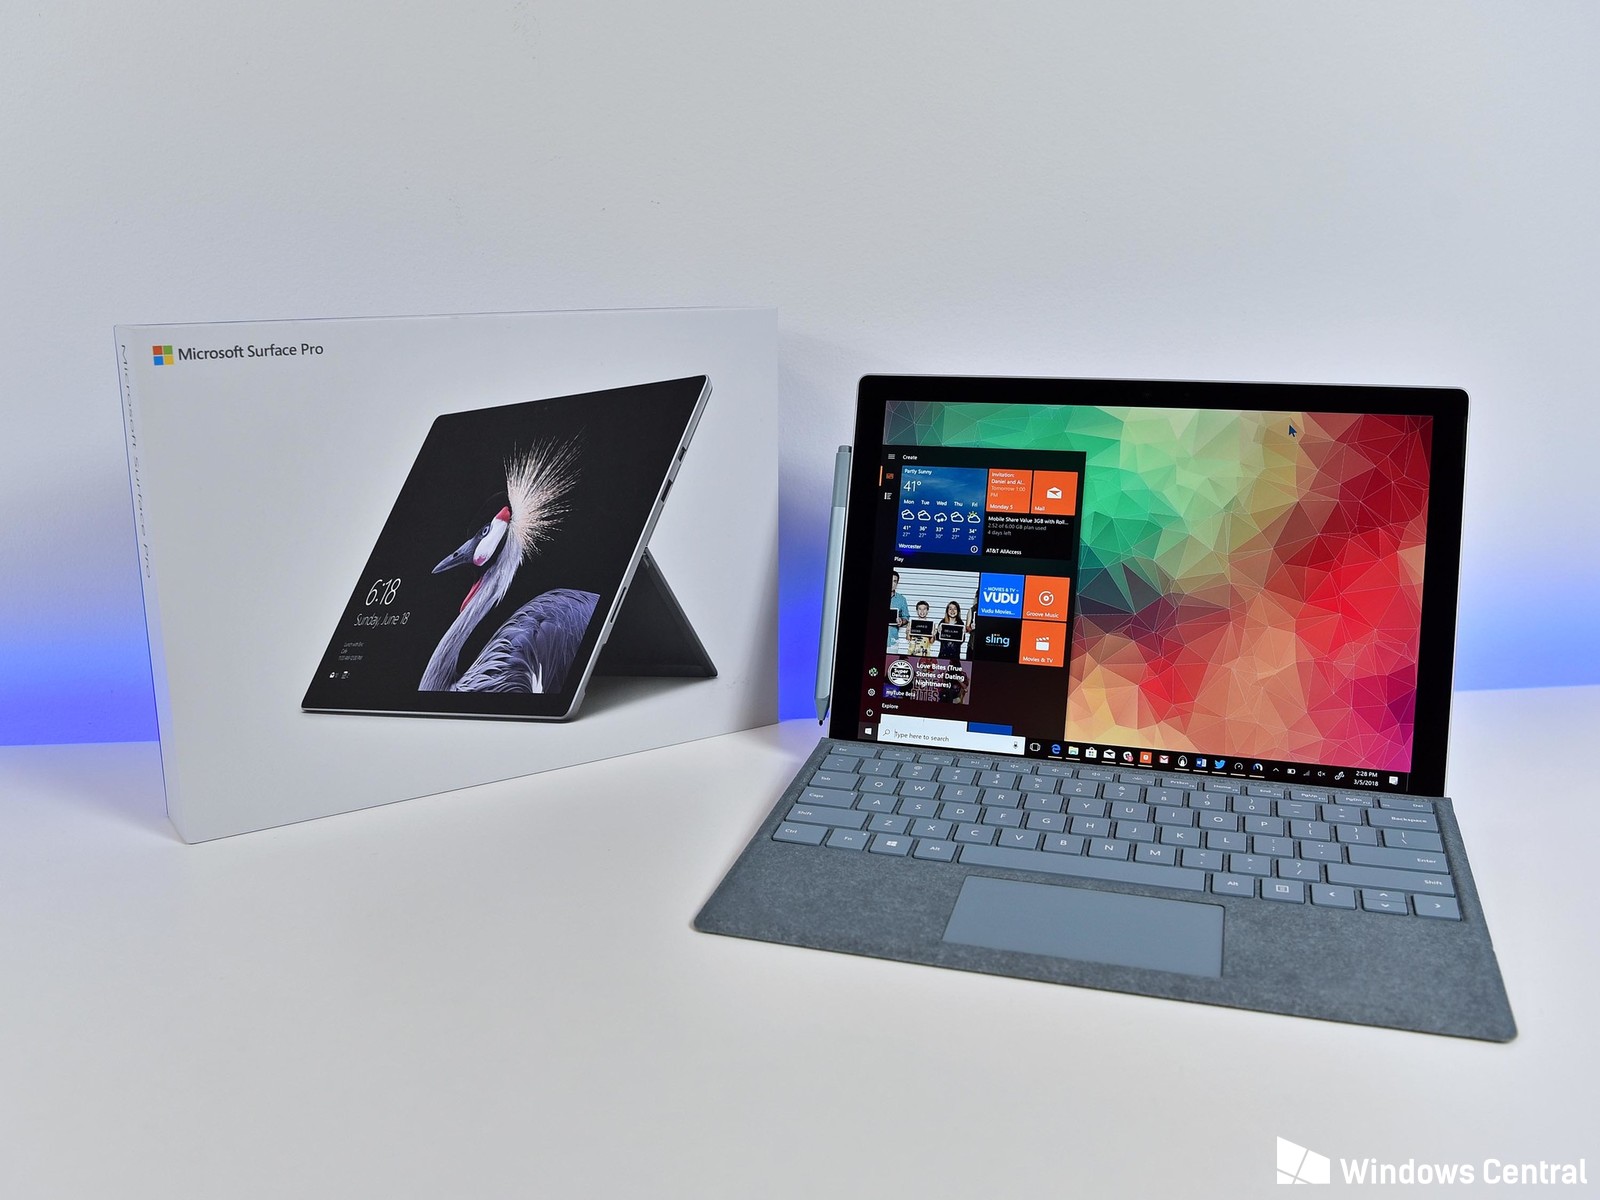 Microsoft launches next-gen Surface Pro 6, Surface Laptop 2, Surface Studio 2 and more